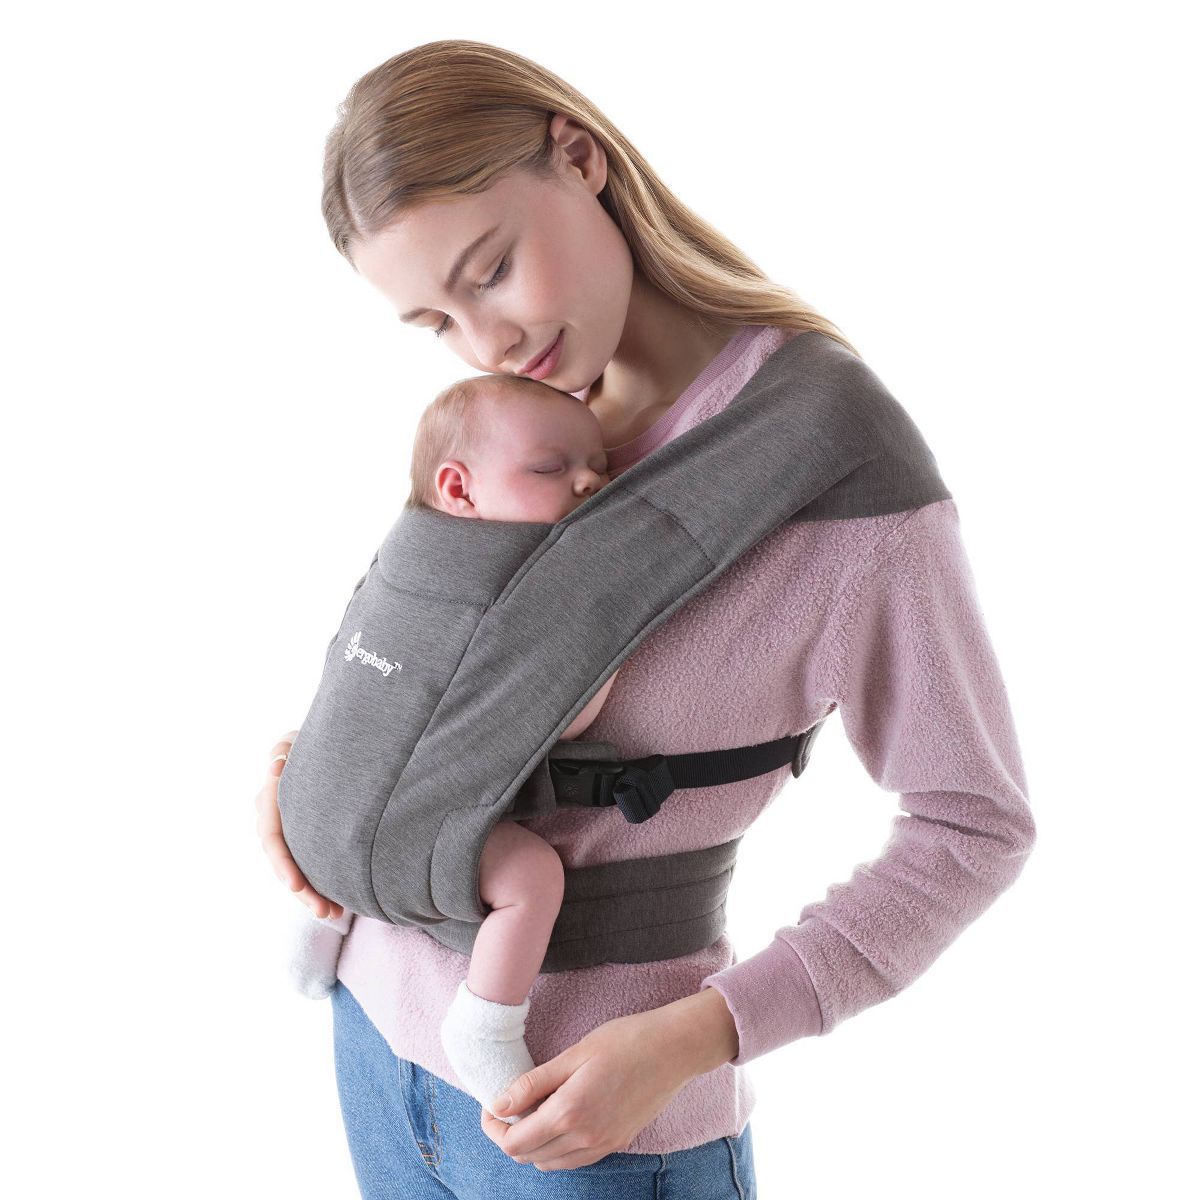 Ergobaby Embrace Cozy Knit Newborn Carrier for Babies | Target